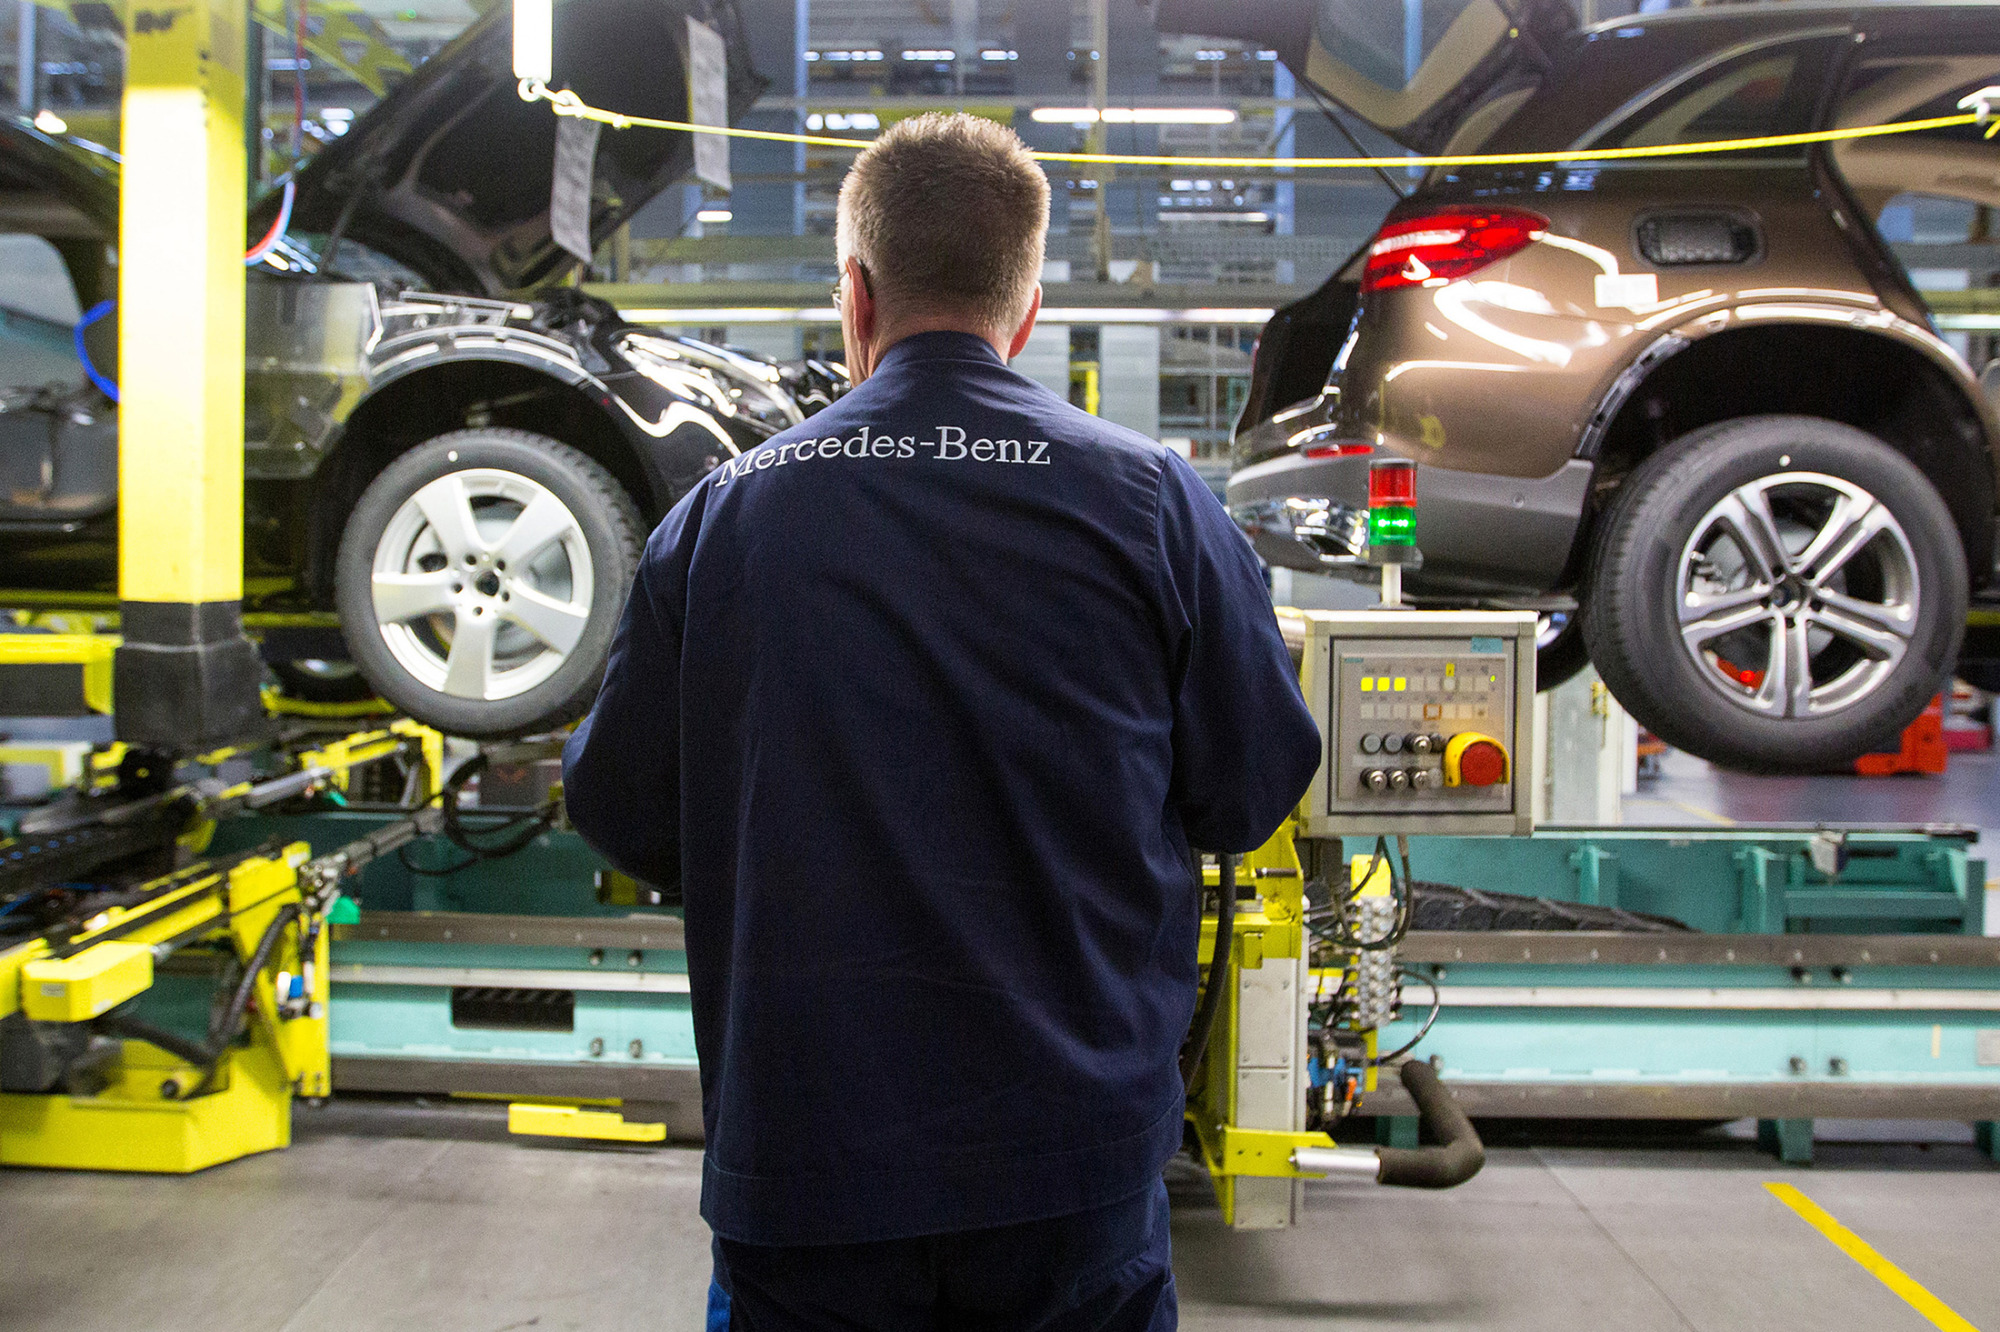 An employee stands beside Mercedes-Benz GLC sports utility vehicles (SUV) on the assembly line at the luxury automaker's factory in Bremen, Germany, on Tuesday, Jan. 24, 2017. BMW lost its crown as the world's biggest luxury-car brand to Mercedes-Benz, ending its reign after more than a decade amid a cluttered lineup of aging models.